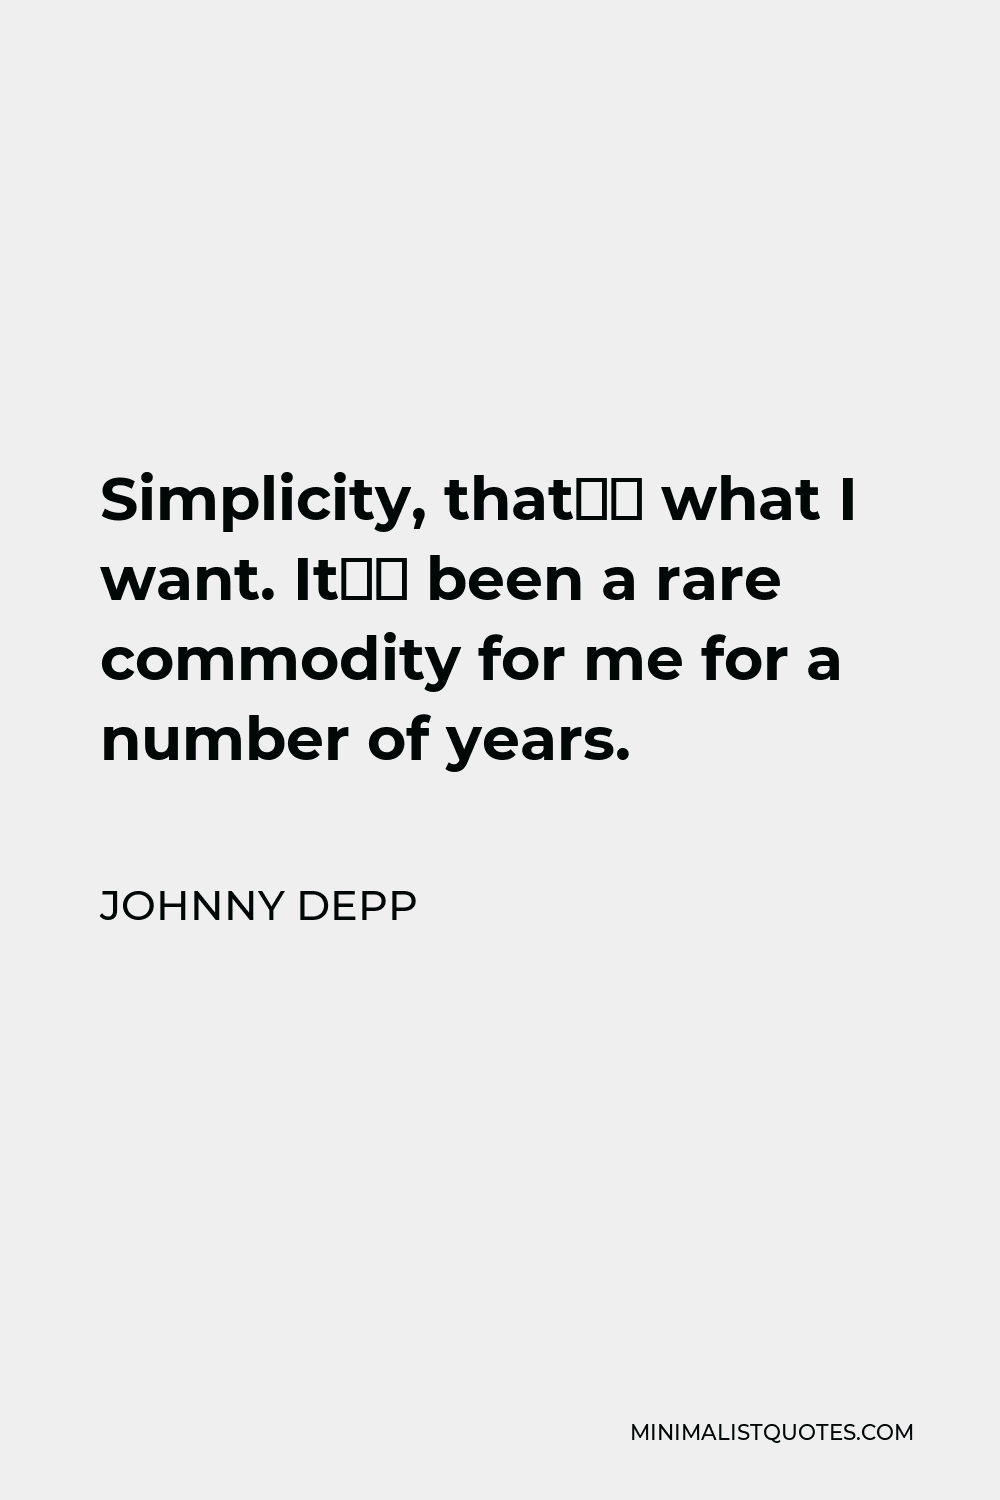 Johnny Depp Quote - Simplicity, that’s what I want. It’s been a rare commodity for me for a number of years.